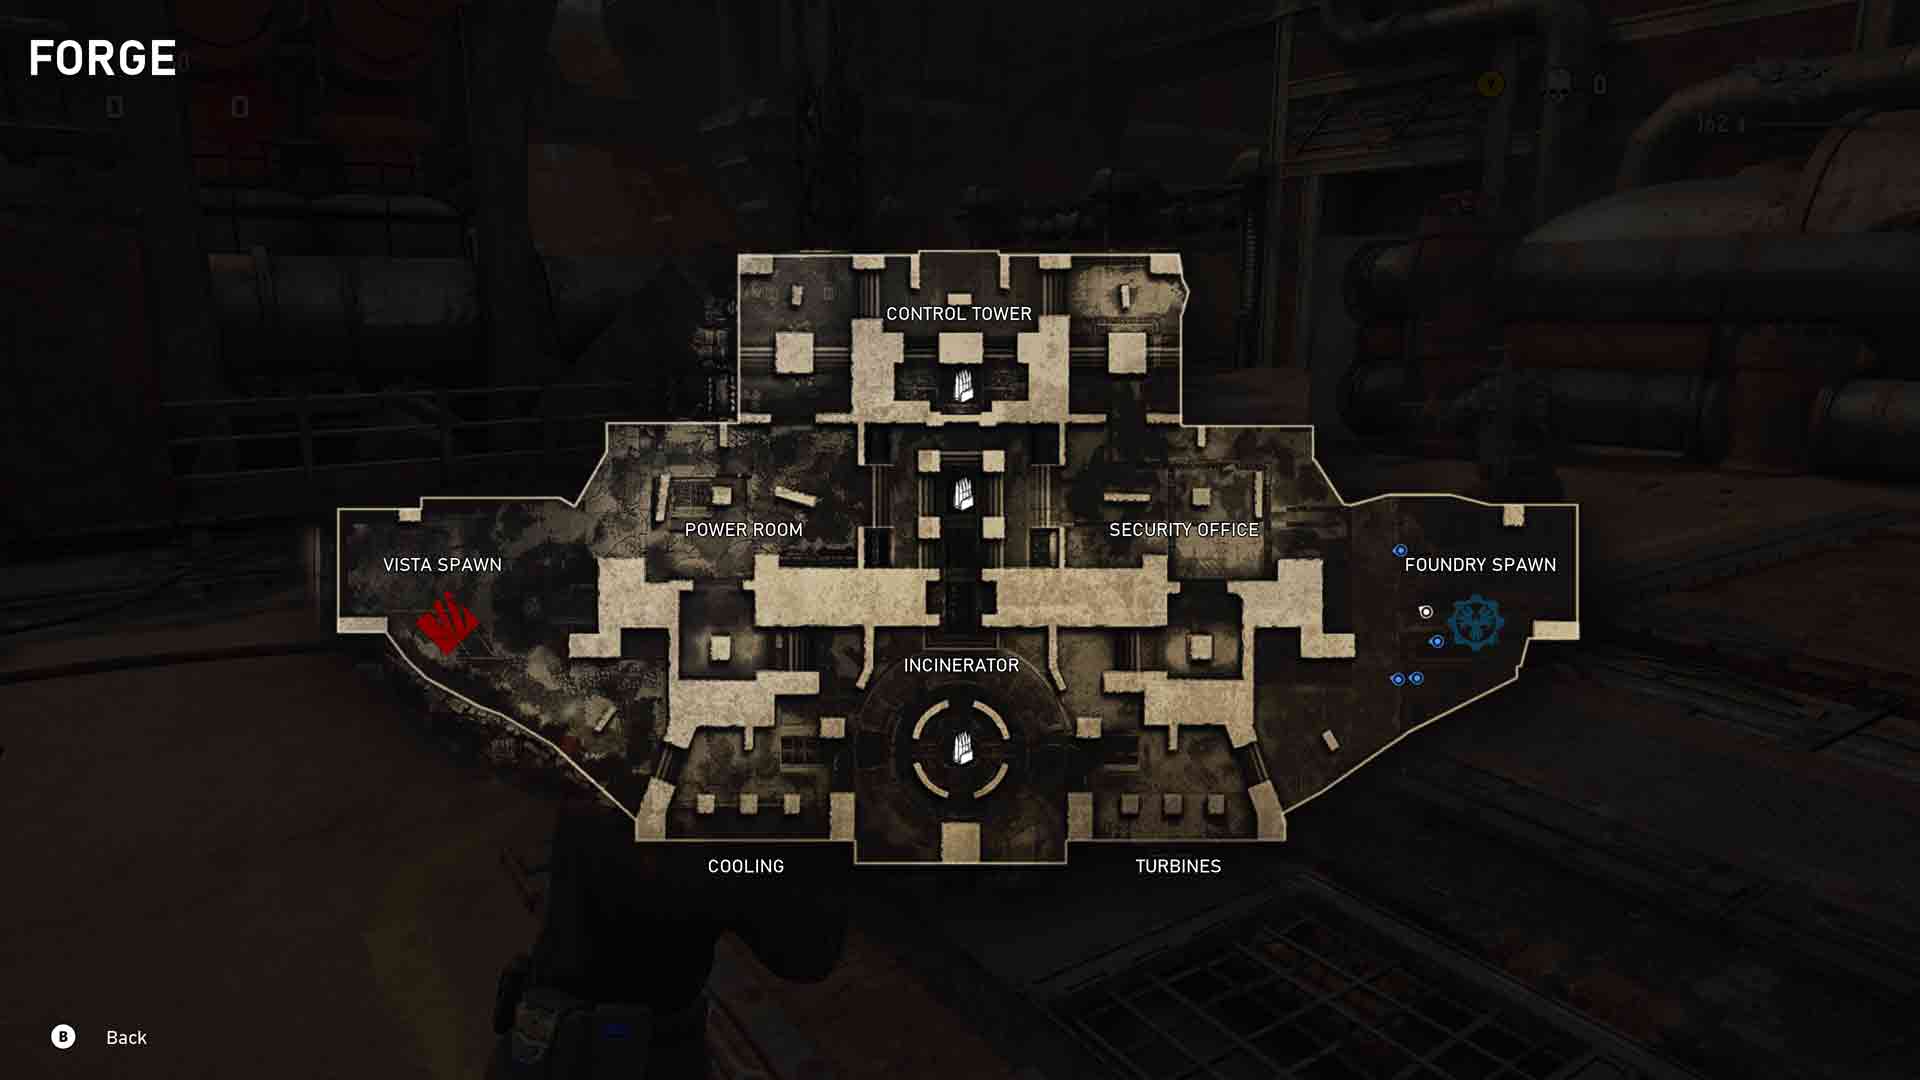 Gears 5: Forge Map Layout